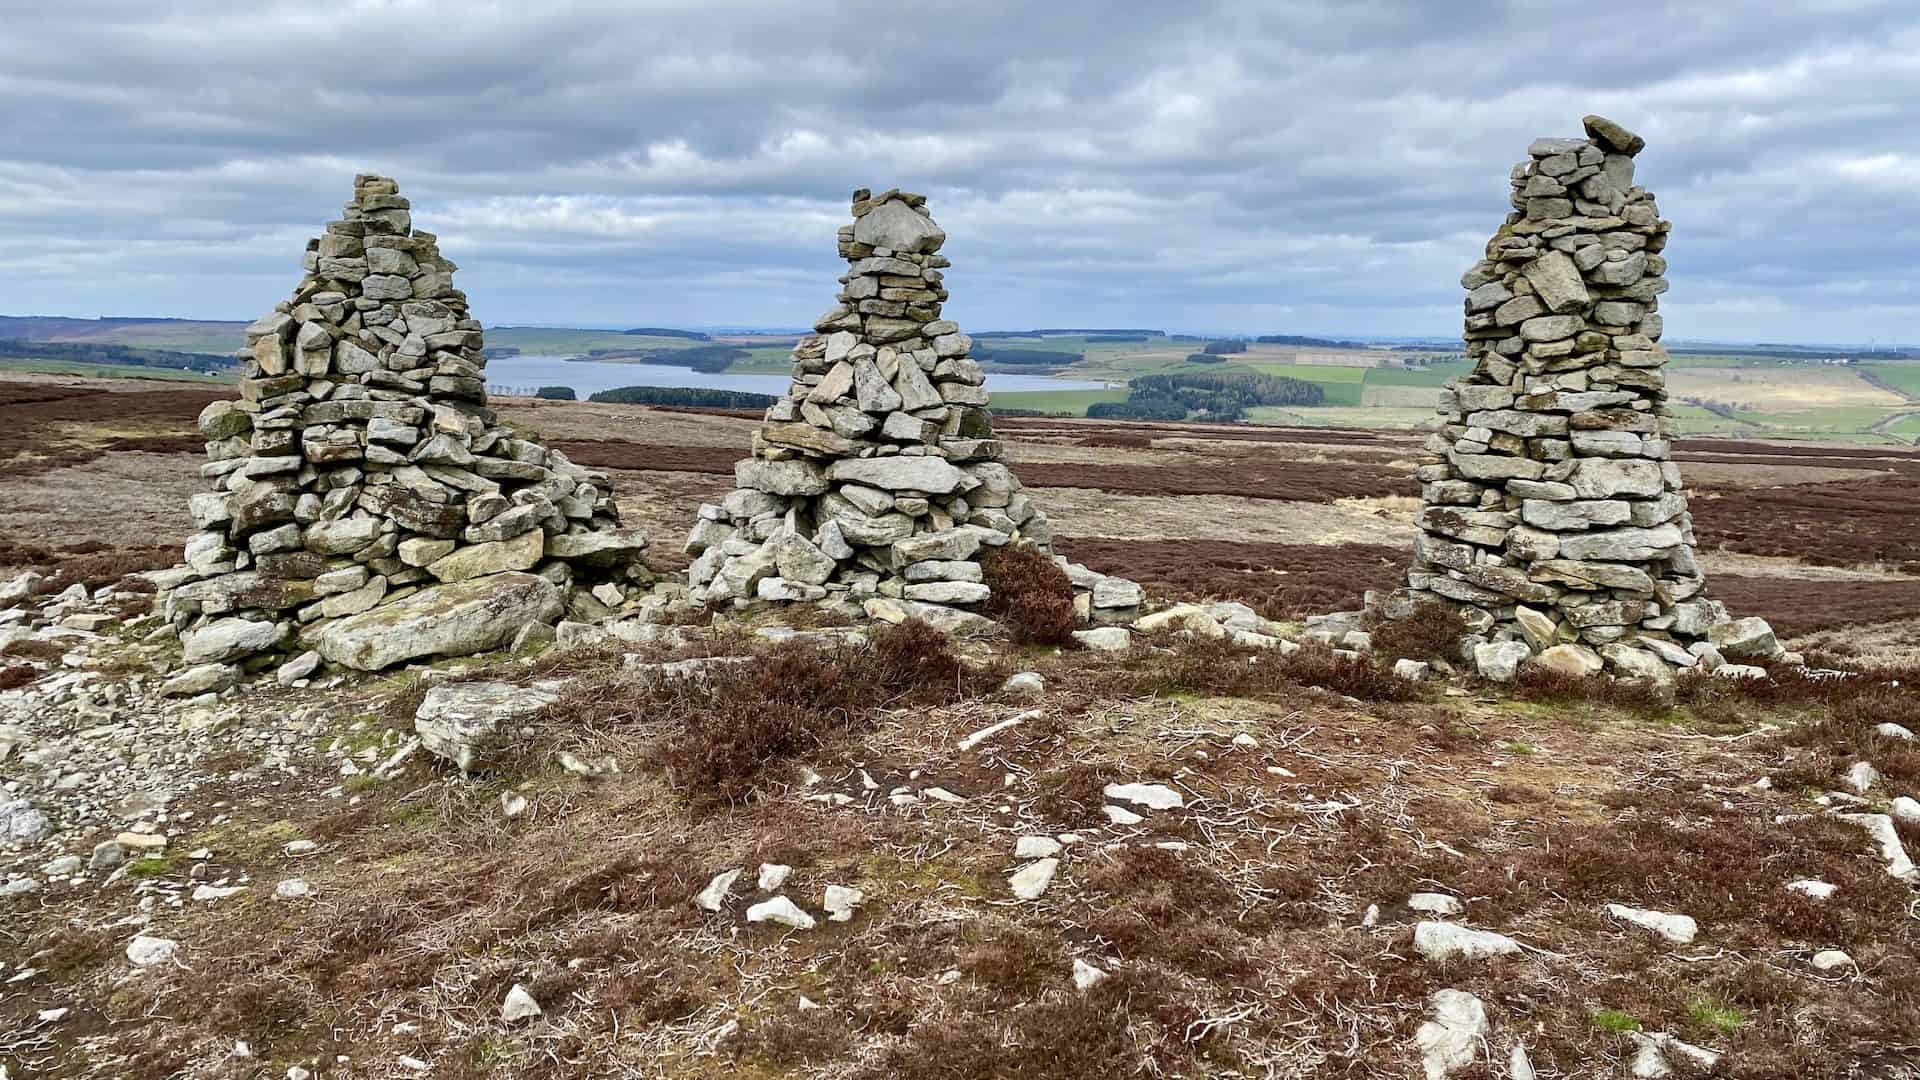 The Three Curricks, with Derwent Reservoir in the background. A currick is a Cumbrian word for what is more commonly known as a cairn, a man-made pile of stones used to guide travellers.